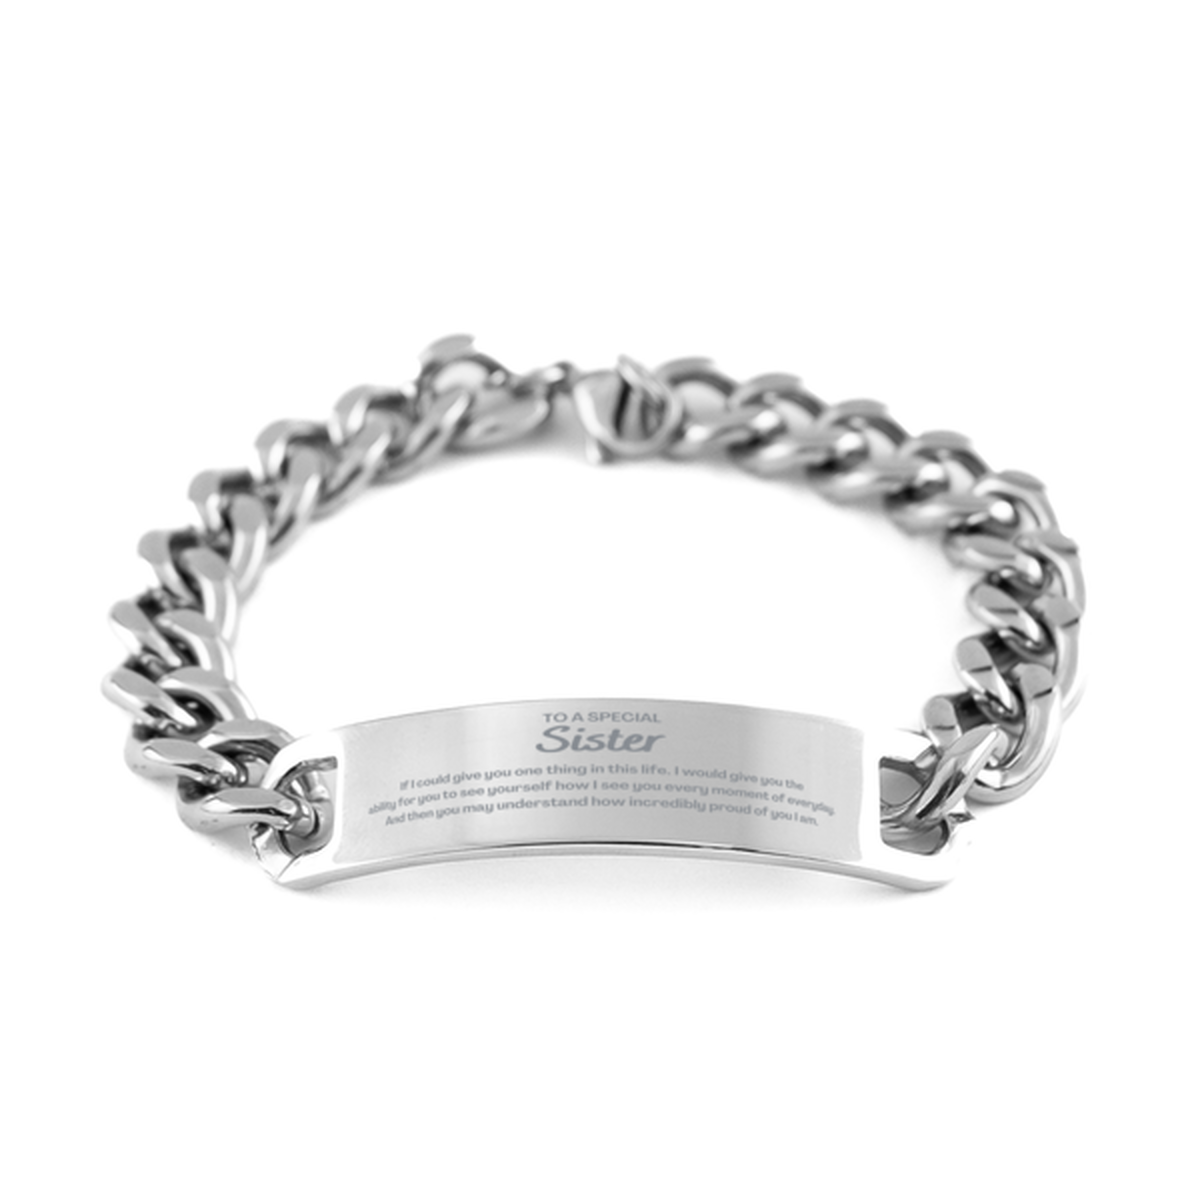 To My Sister Cuban Chain Stainless Steel Bracelet, Gifts For Sister Engraved, Inspirational Gifts for Christmas Birthday, Epic Gifts for Sister To A Special Sister how incredibly proud of you I am